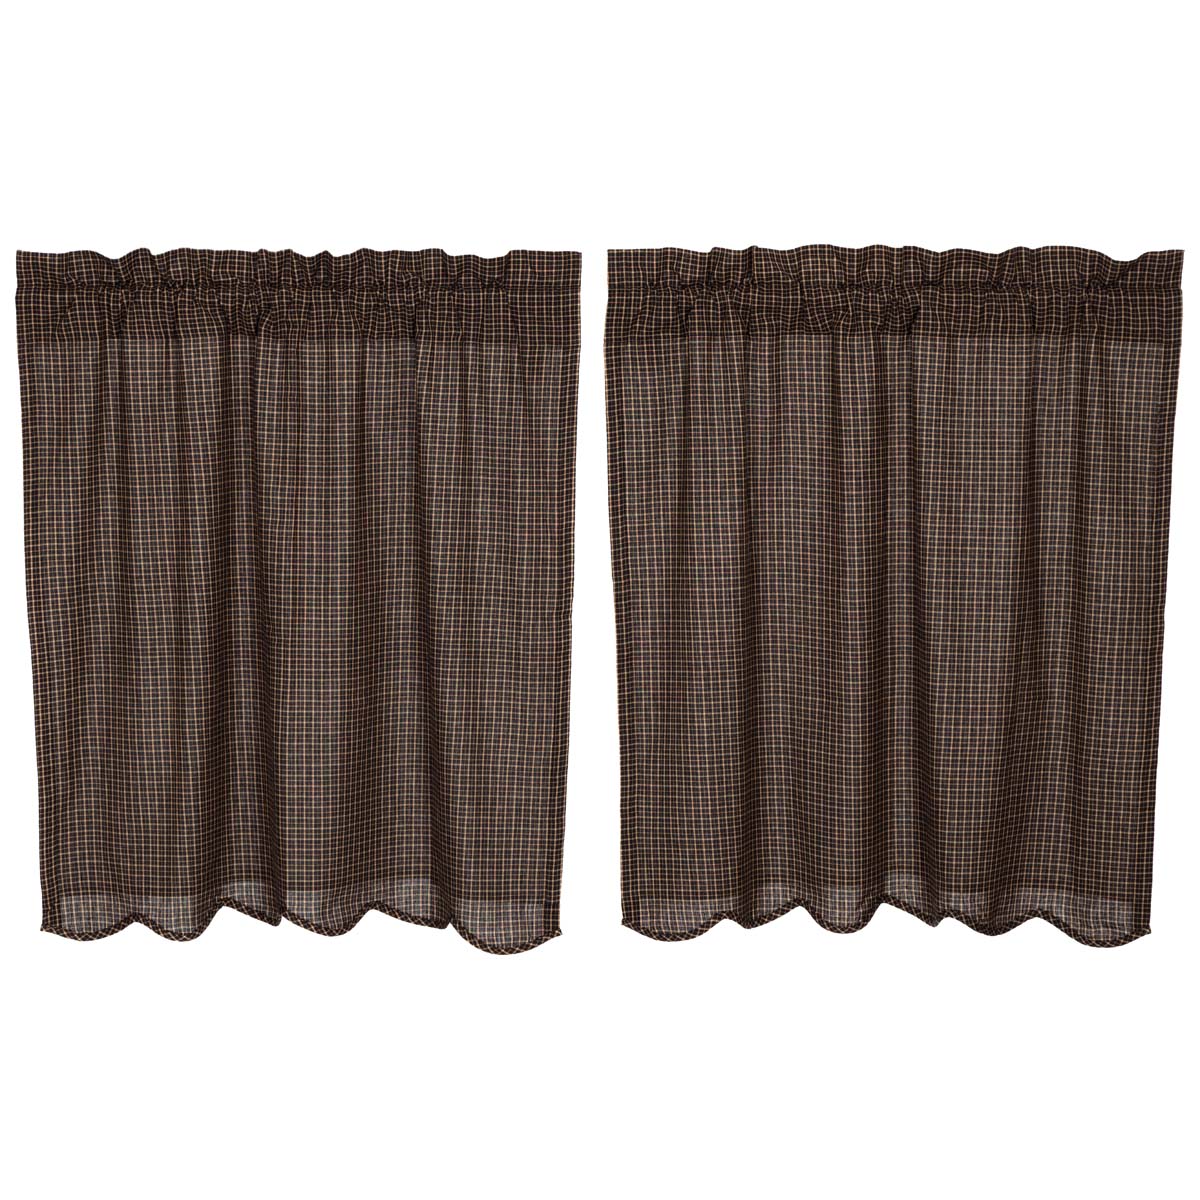 10159-Kettle-Grove-Plaid-Tier-Scalloped-Set-of-2-L36xW36-image-6